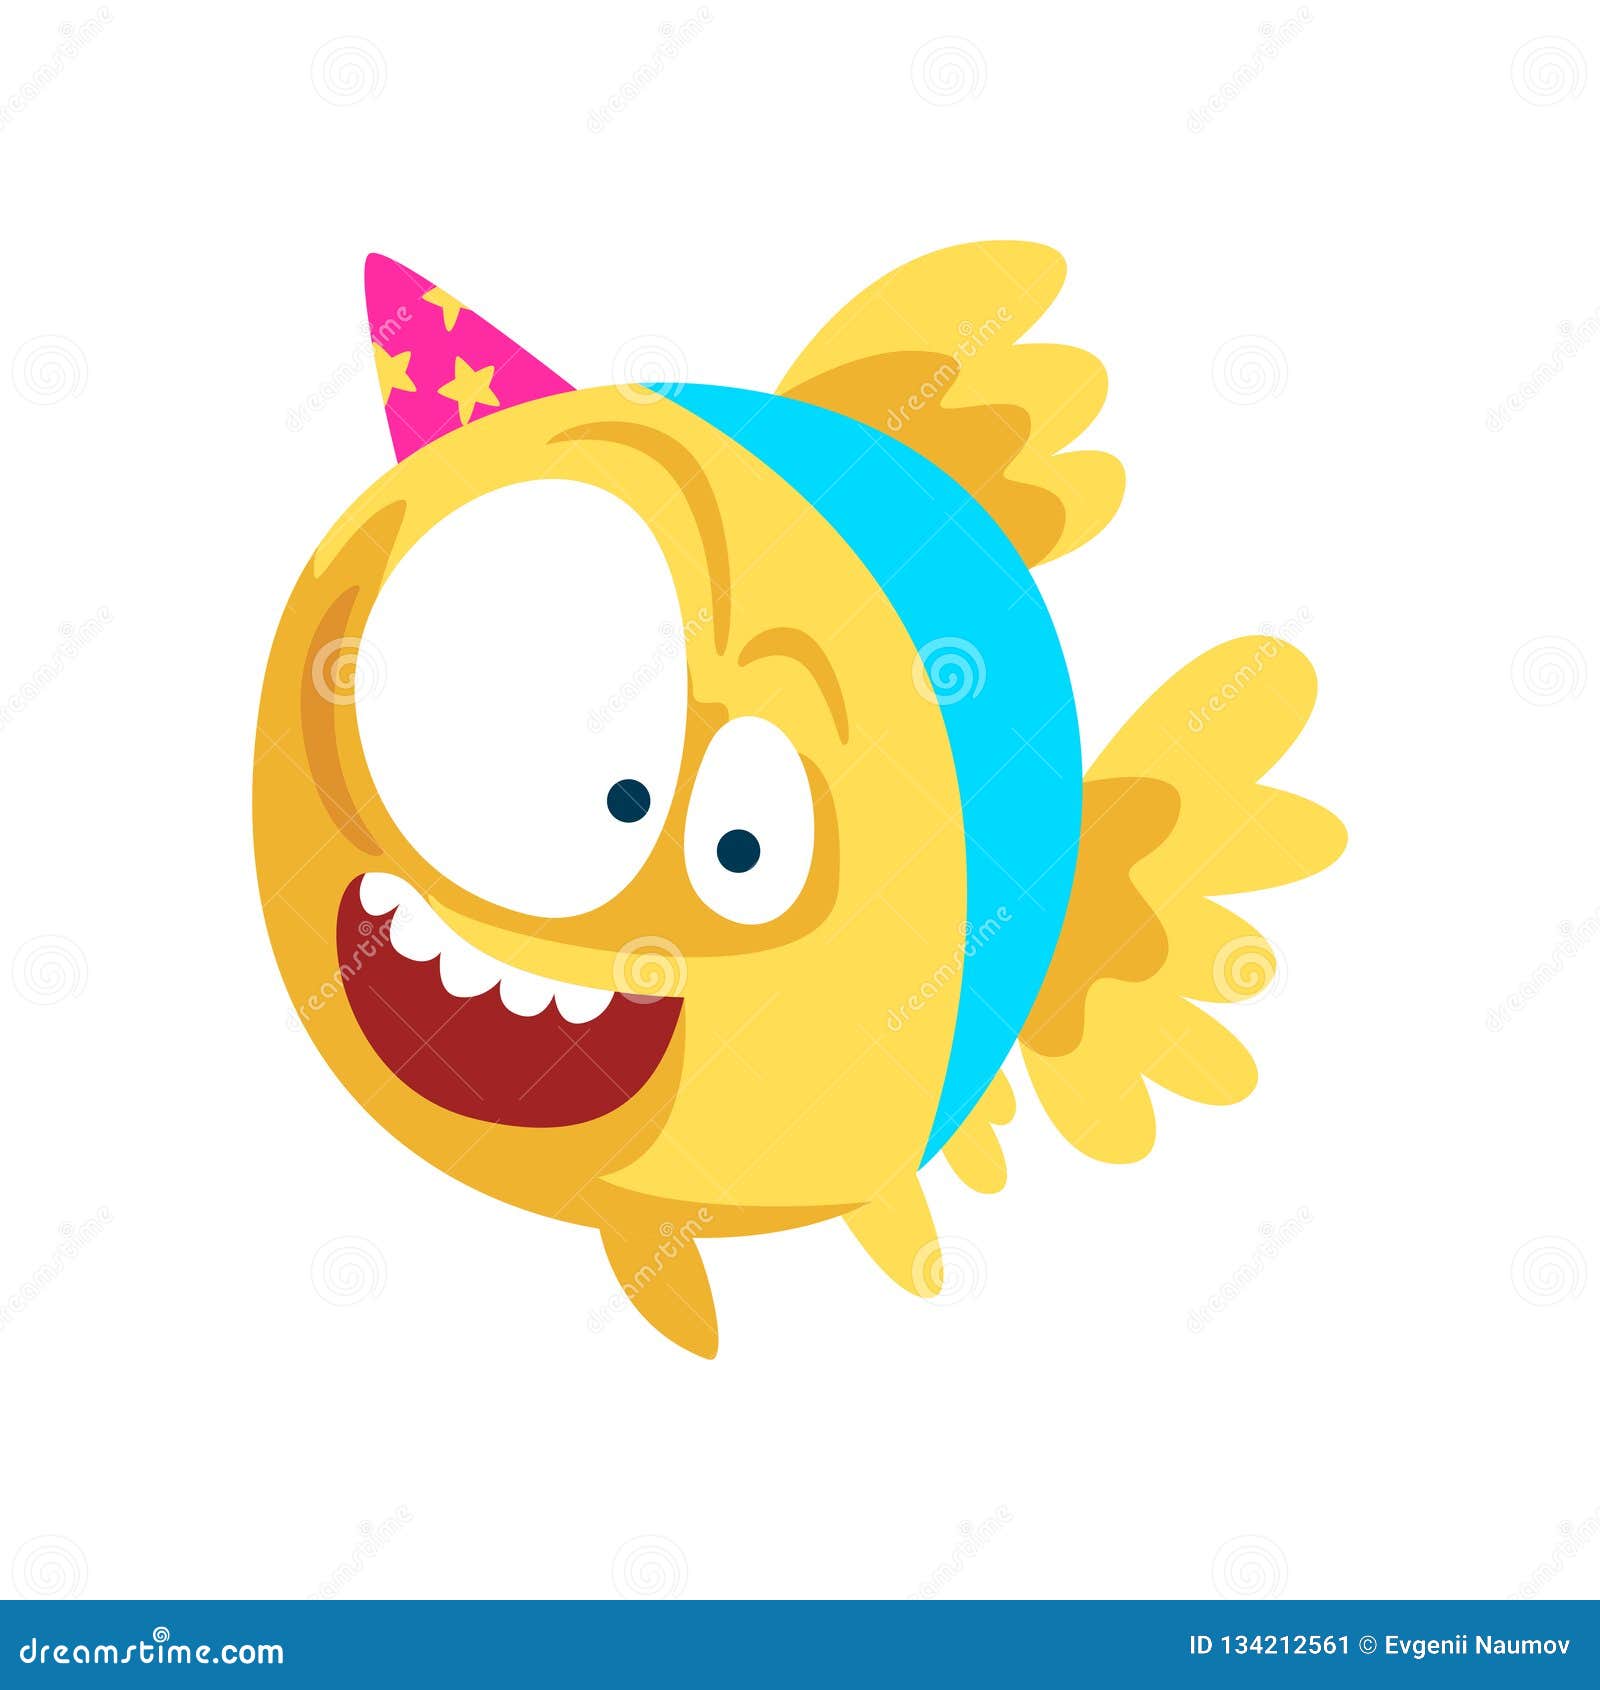 Funny Fish in Party Hat, Little Sea Creature Character, Marine Theme Design  Element Can Be Used for Kids Party Stock Vector - Illustration of fish,  color: 134212561